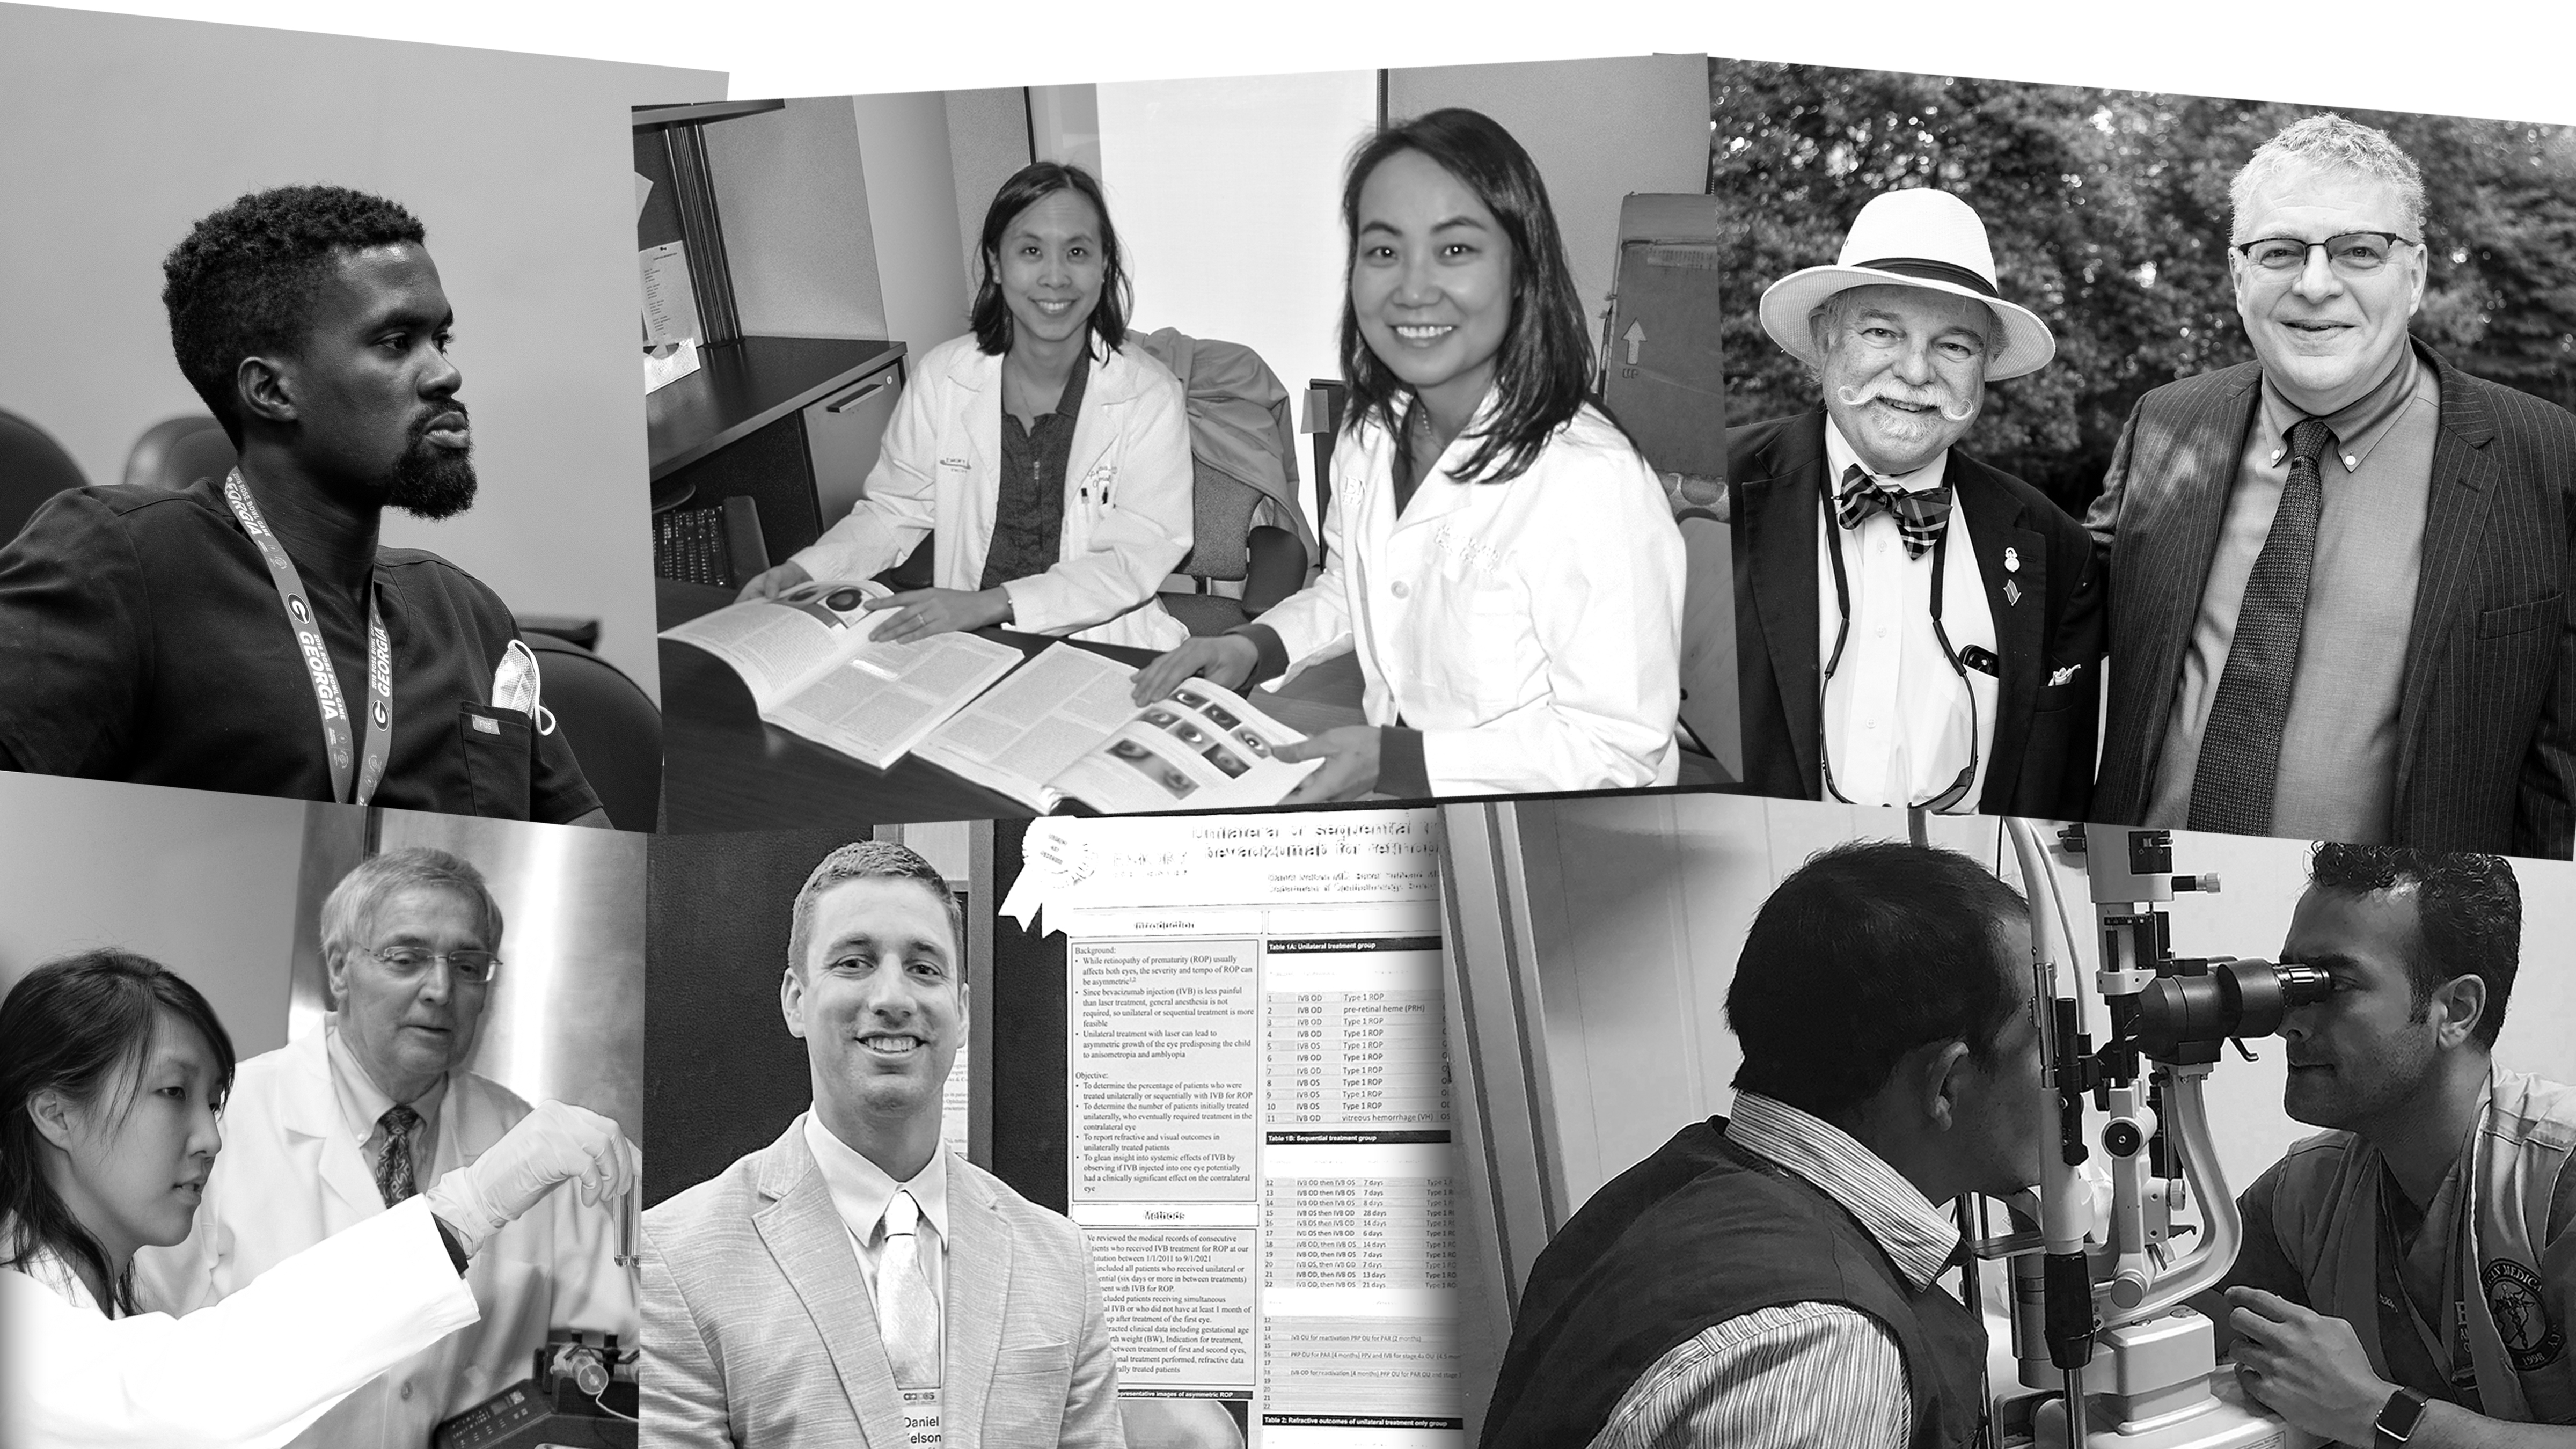 a collage of black-and-white photos from the history of Emory Eye Center that includes interns listening to lectures, doctors reviewing data, doctor looking through telescope, doctor instructing an intern, and a poster session